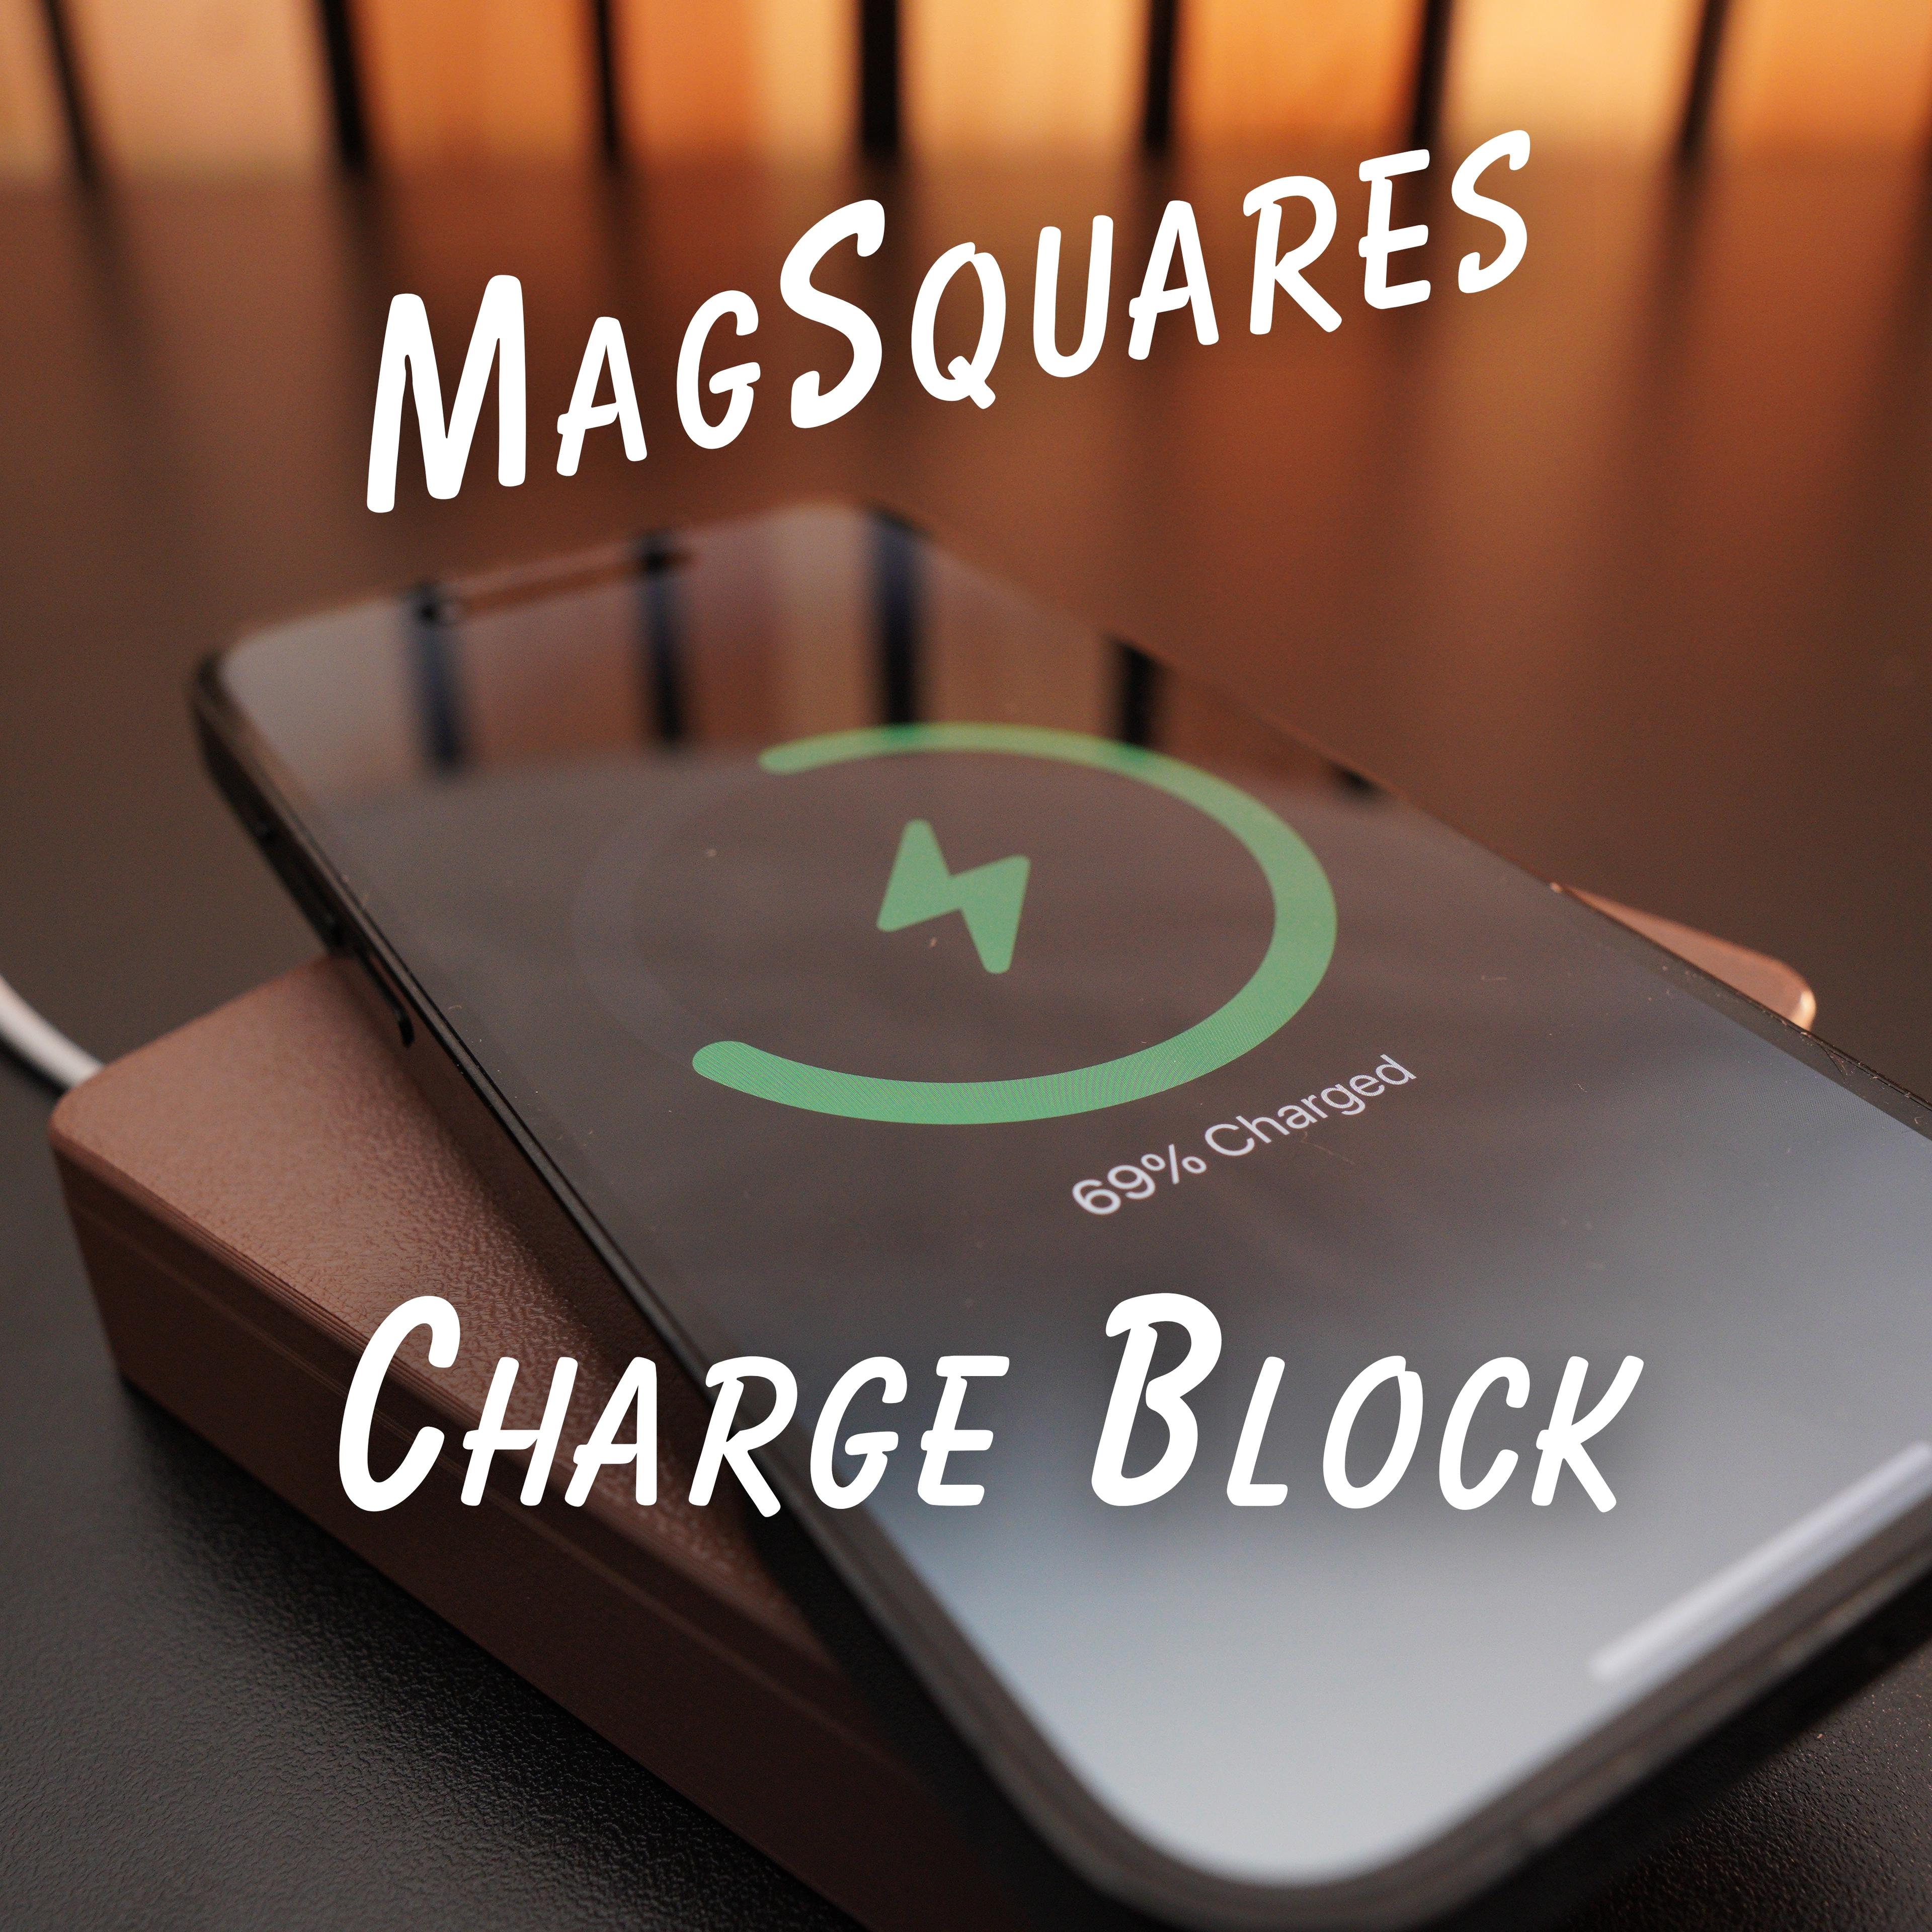 1x1 Charge Square - MagSquare 3d model